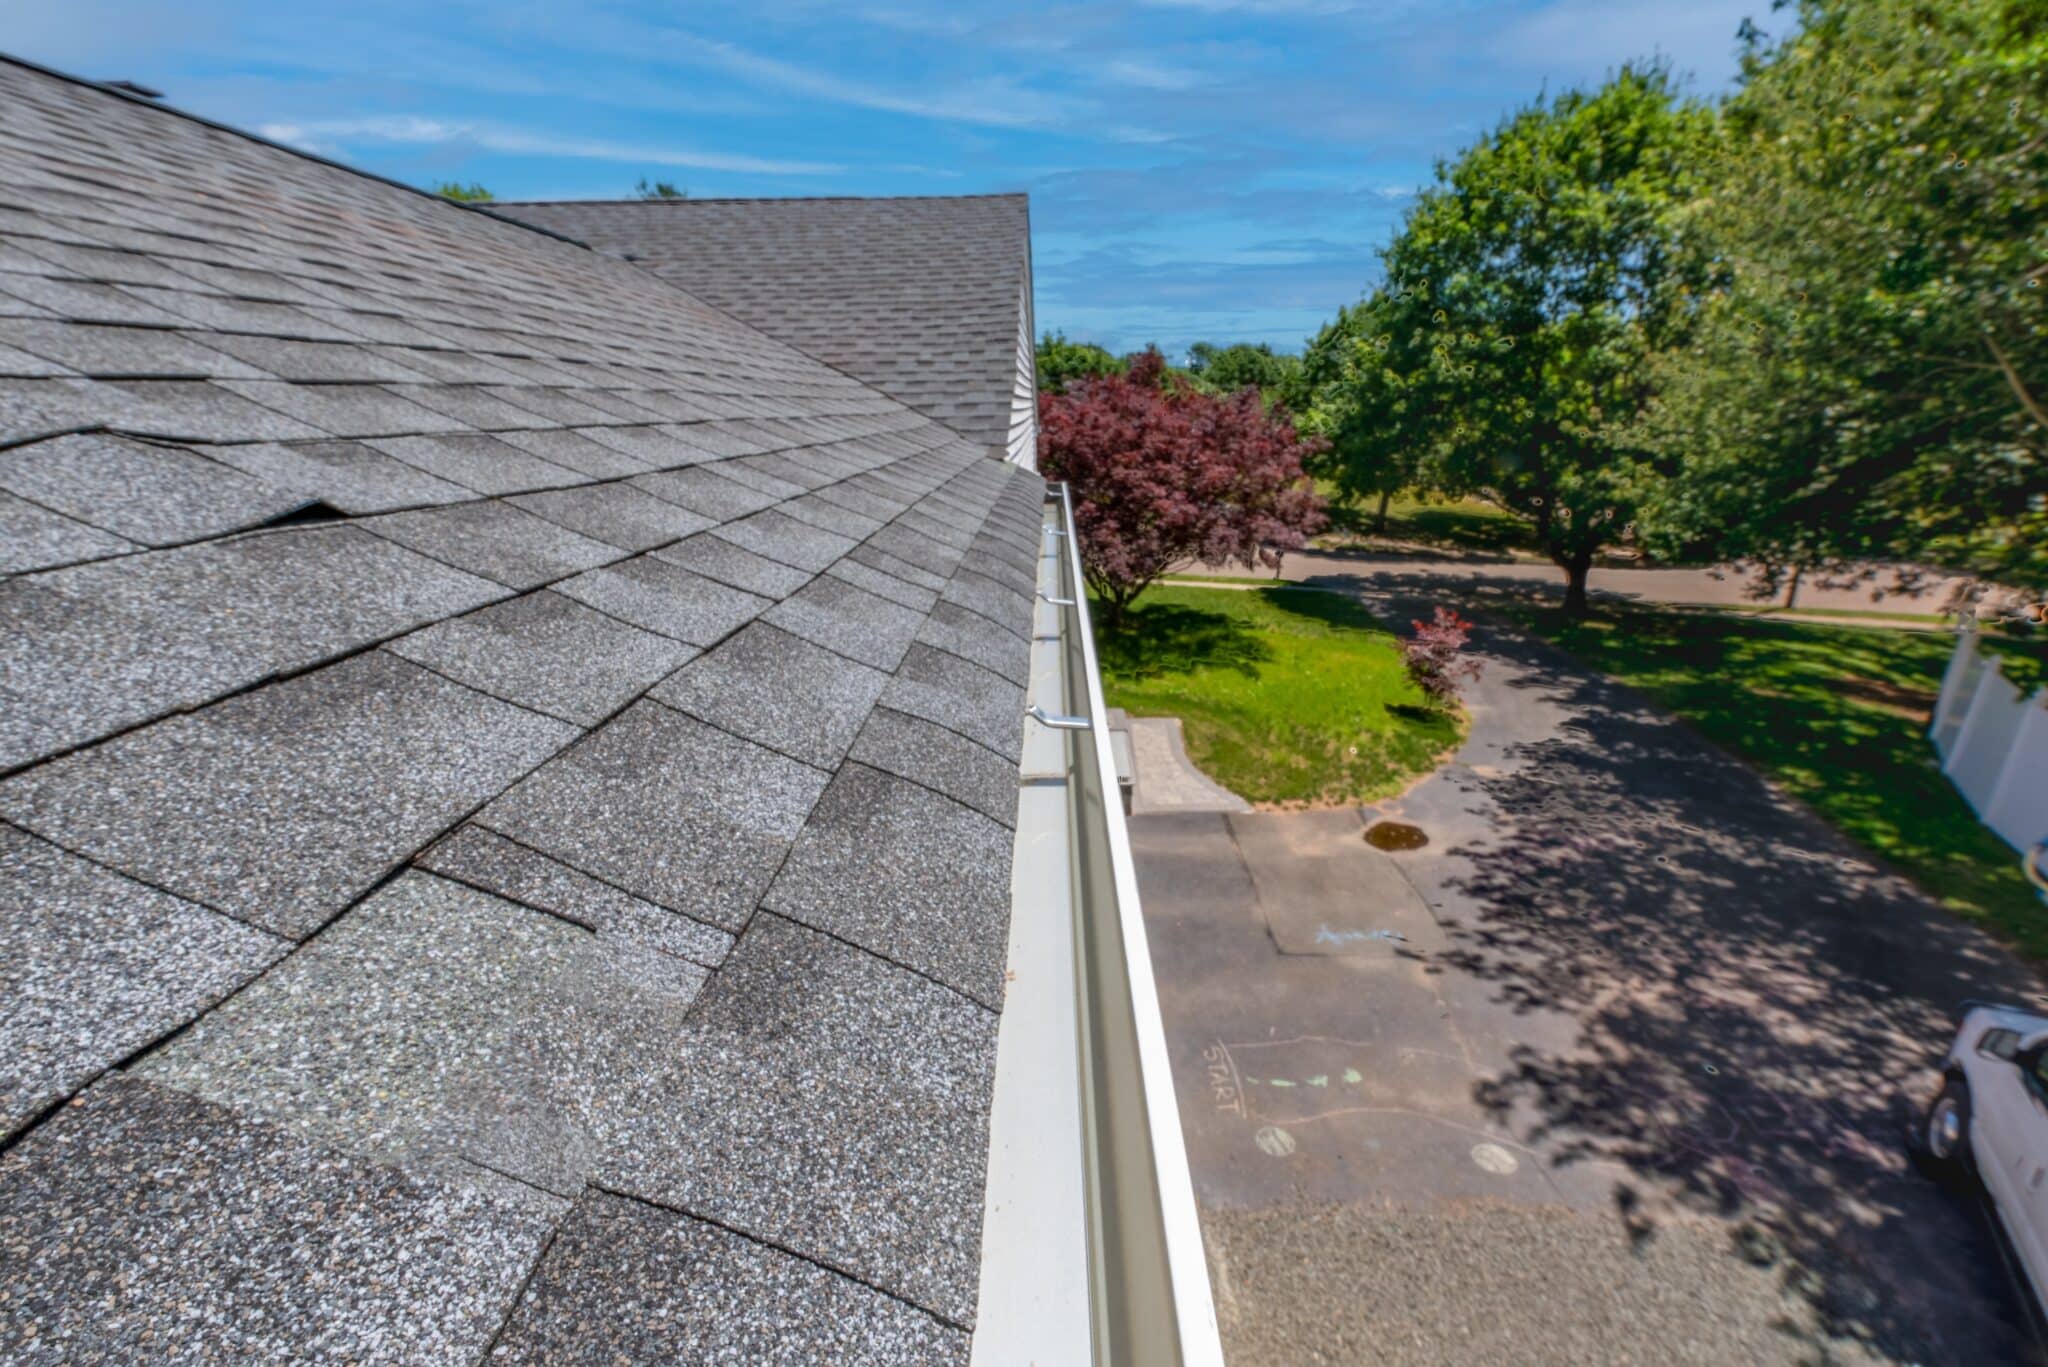 Gutter Cleaning Service Scituate, MA